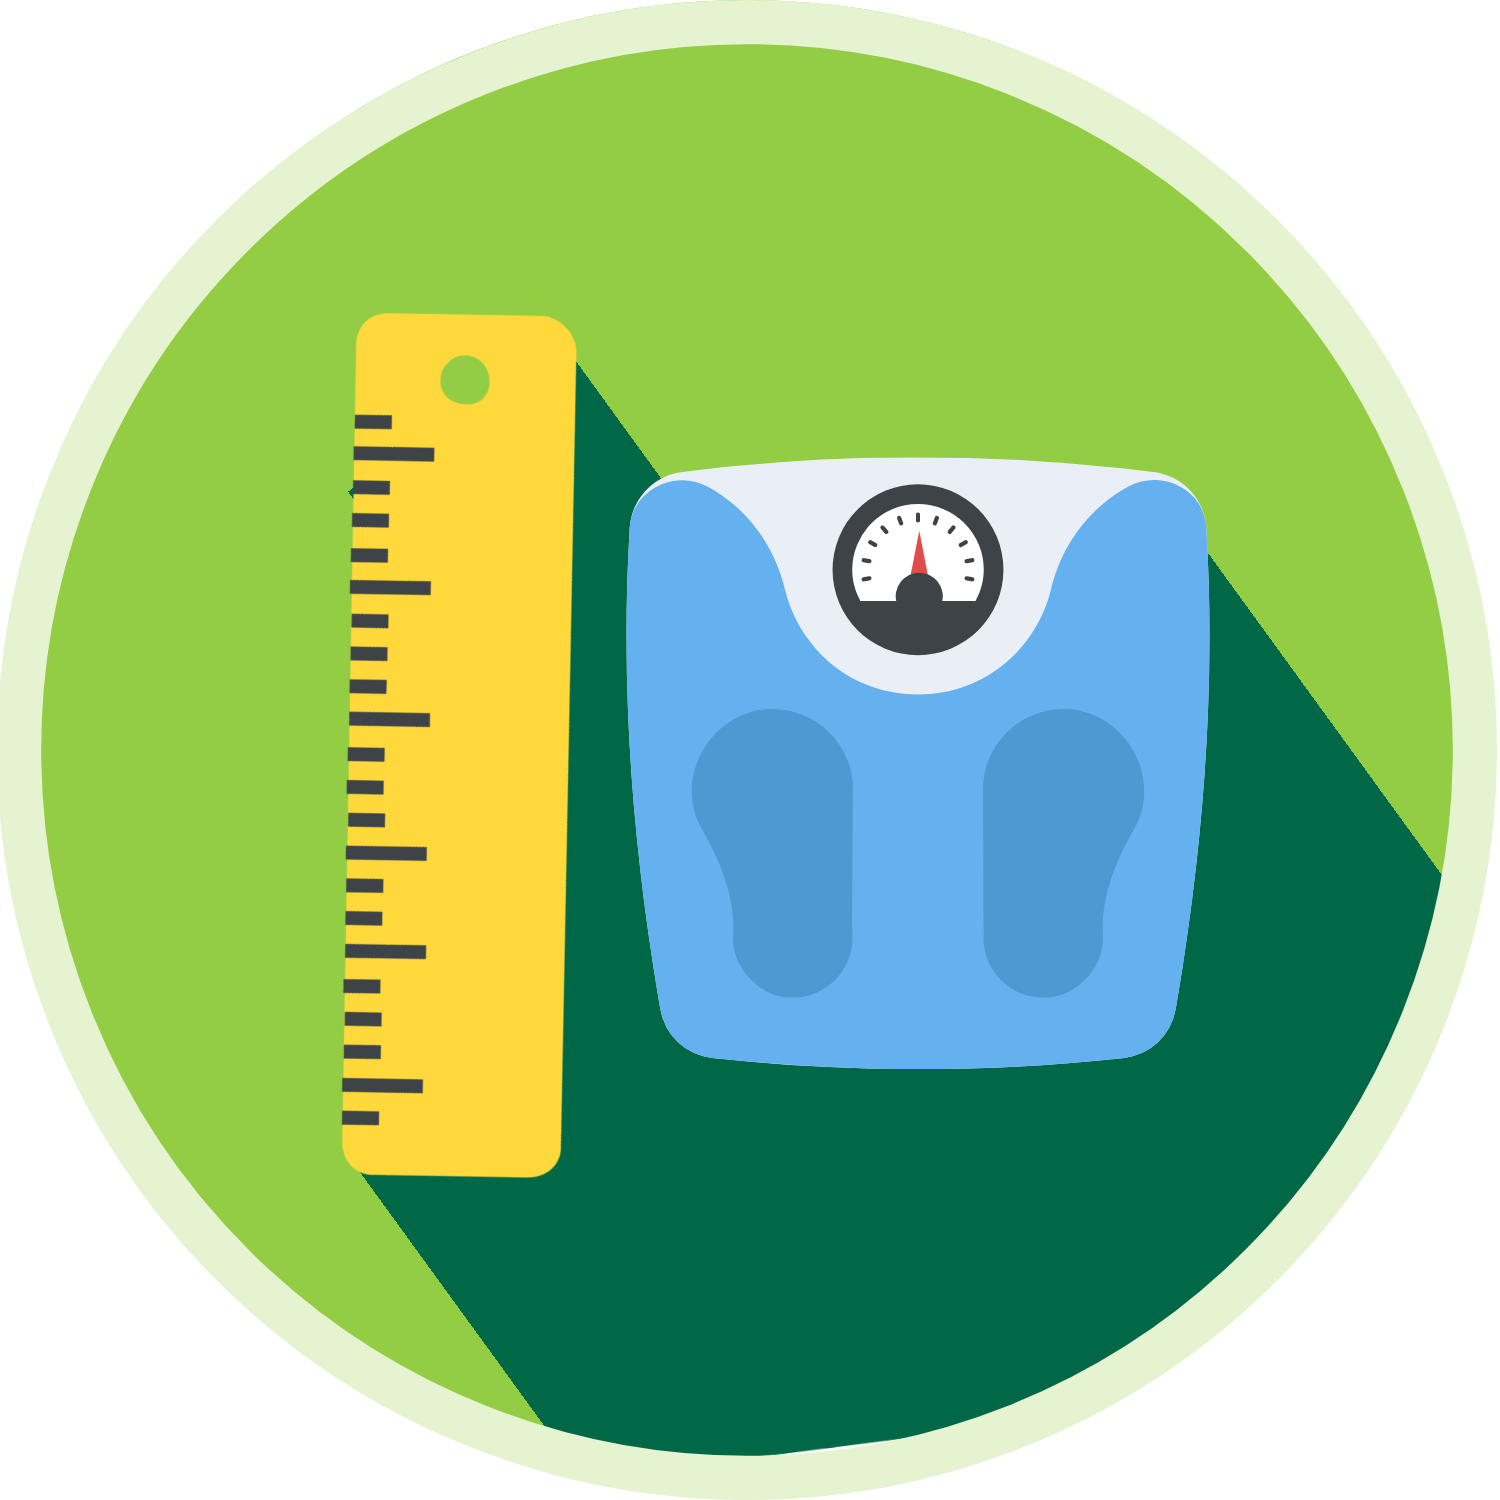 ruler and scales icon on green background